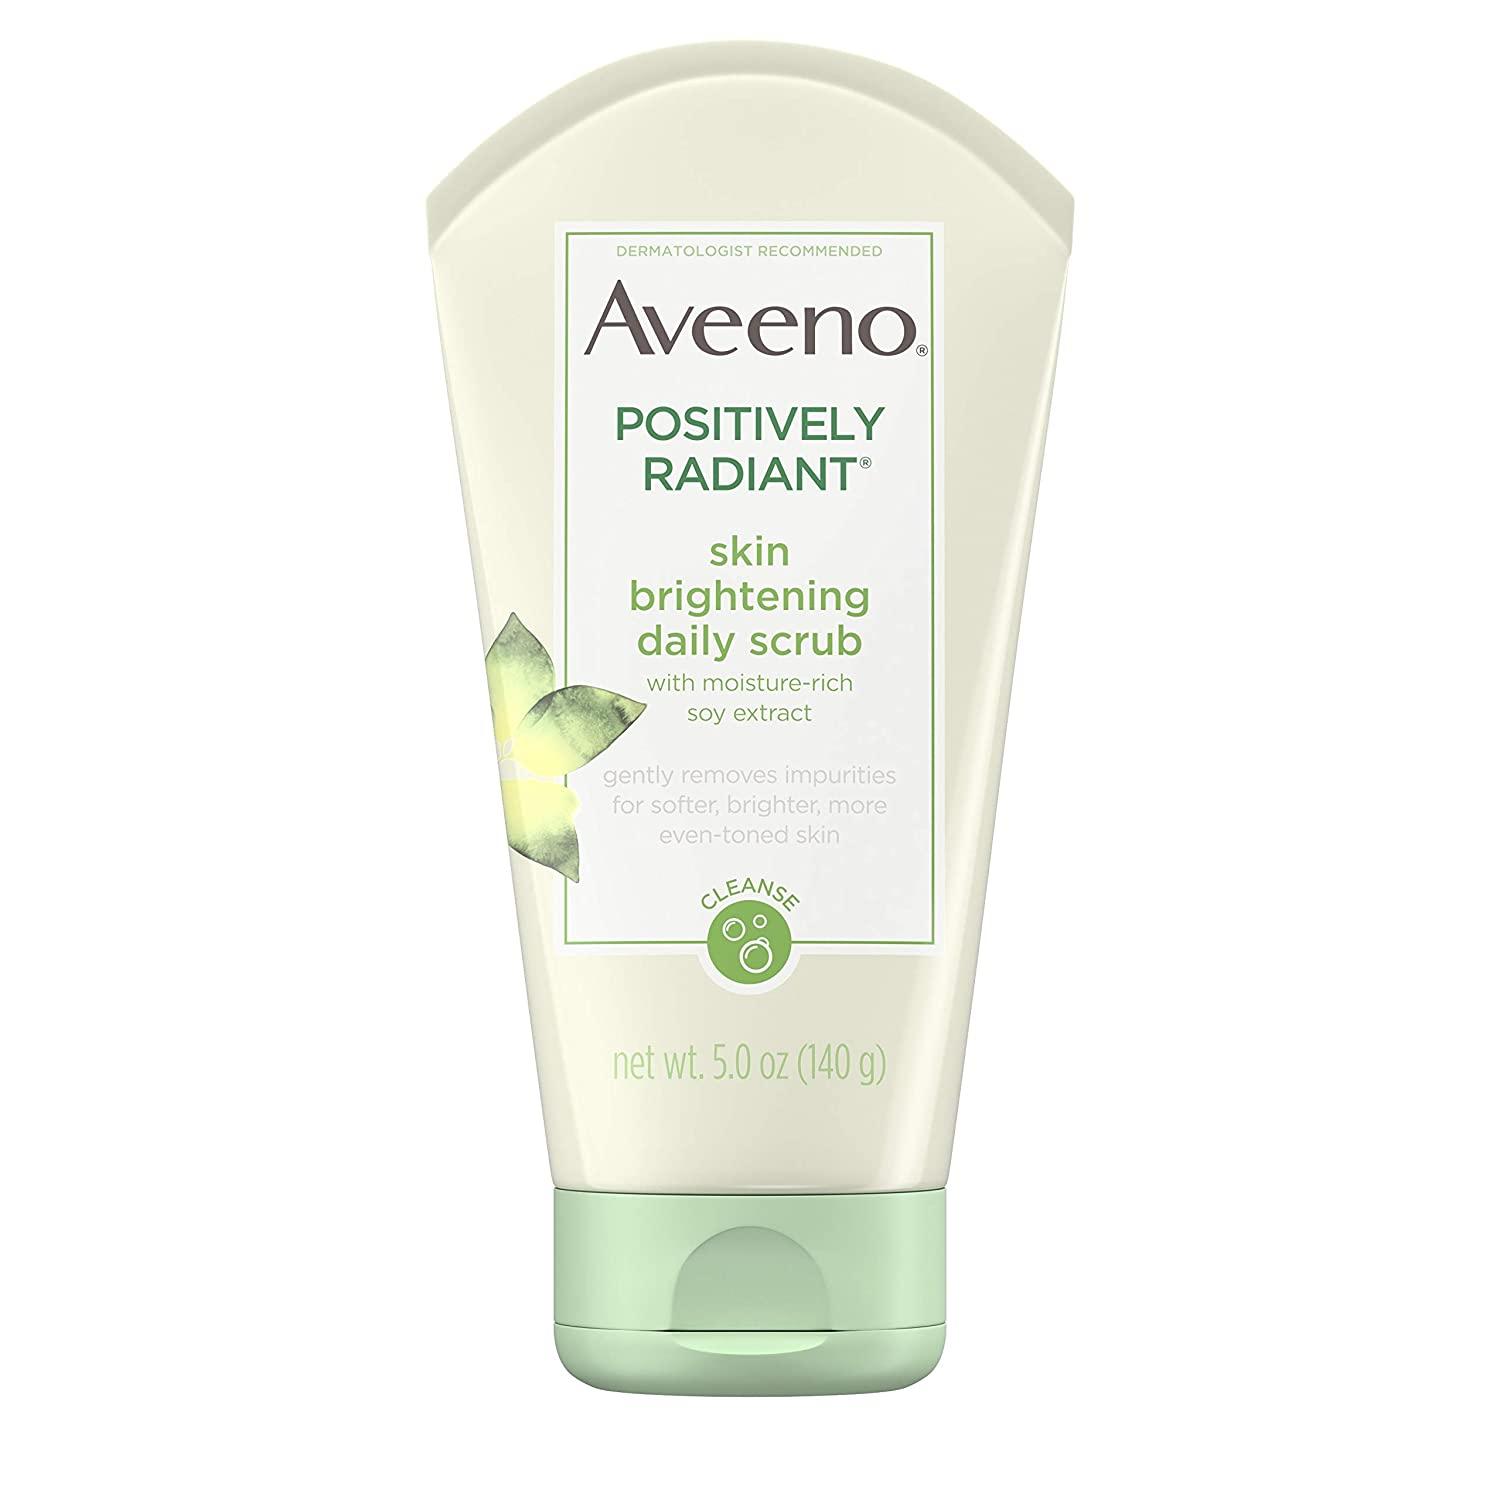 Aveeno Positively Radiant Skin Brightening Daily Facial Scrub for $2.14